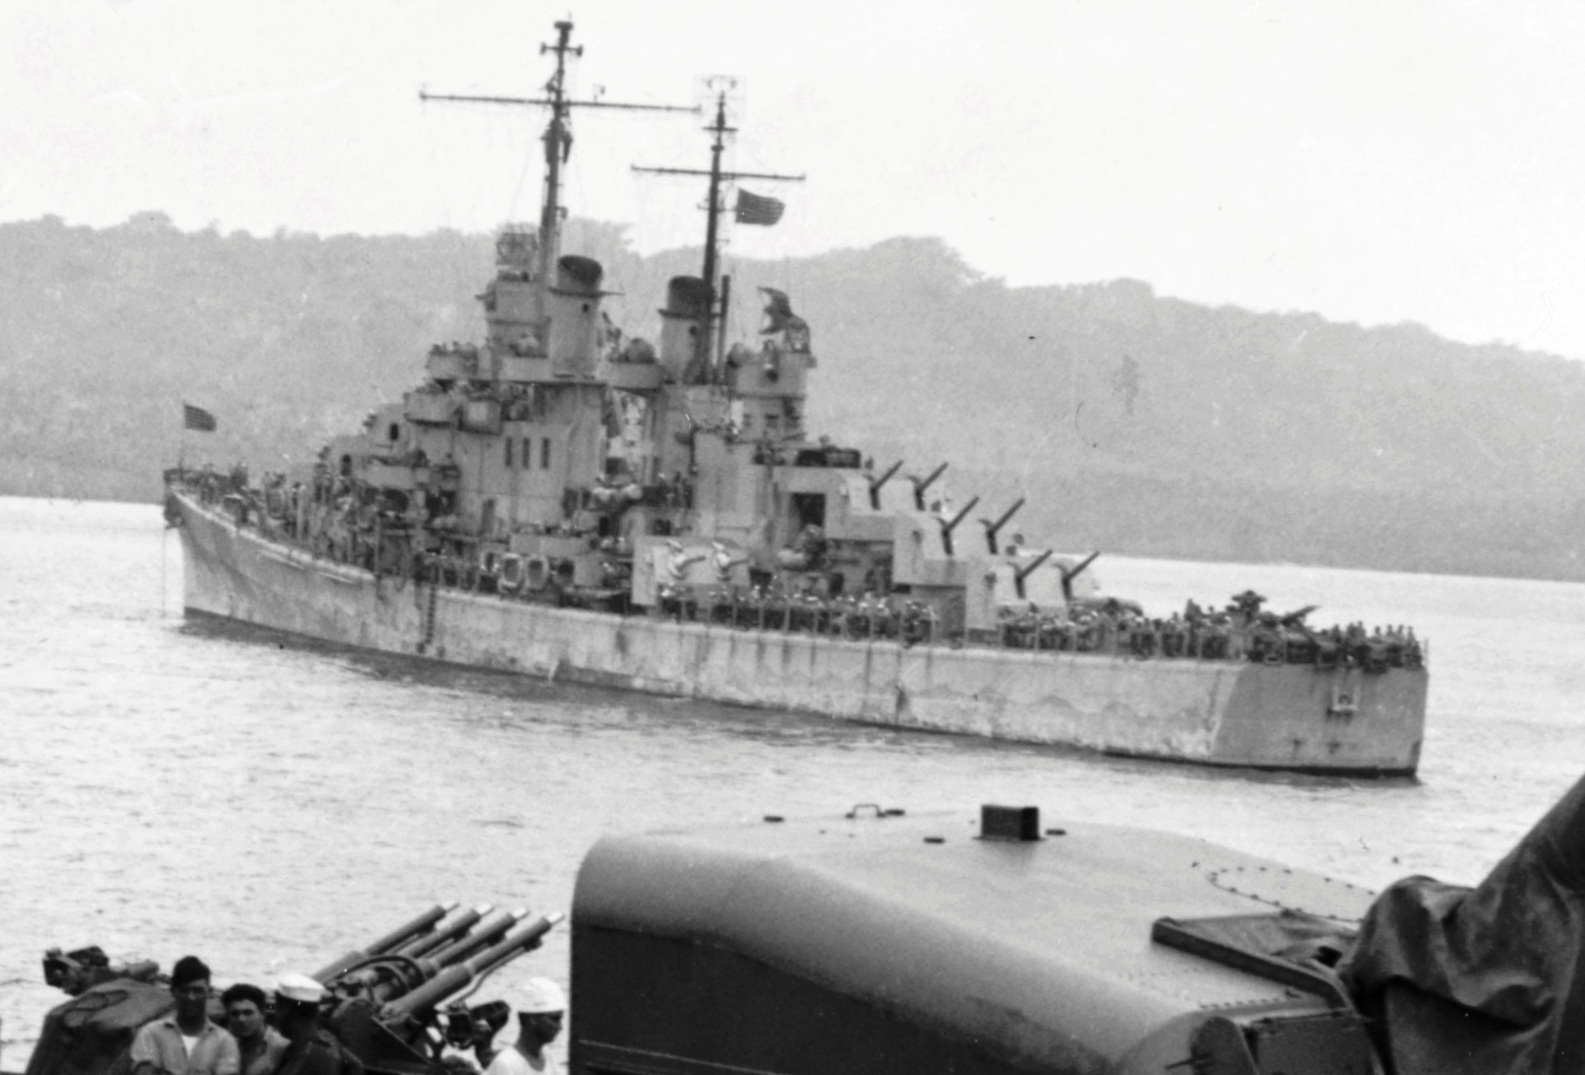 Destroyer USS Laffey (foreground) and cruiser USS Juneau in Luganville anchorage, Espiritu Santo, New Hebrides, 16 Sep 1942. Both ships arrived with survivors of the sunken USS Wasp (Wasp-class). Photo 4 of 4.